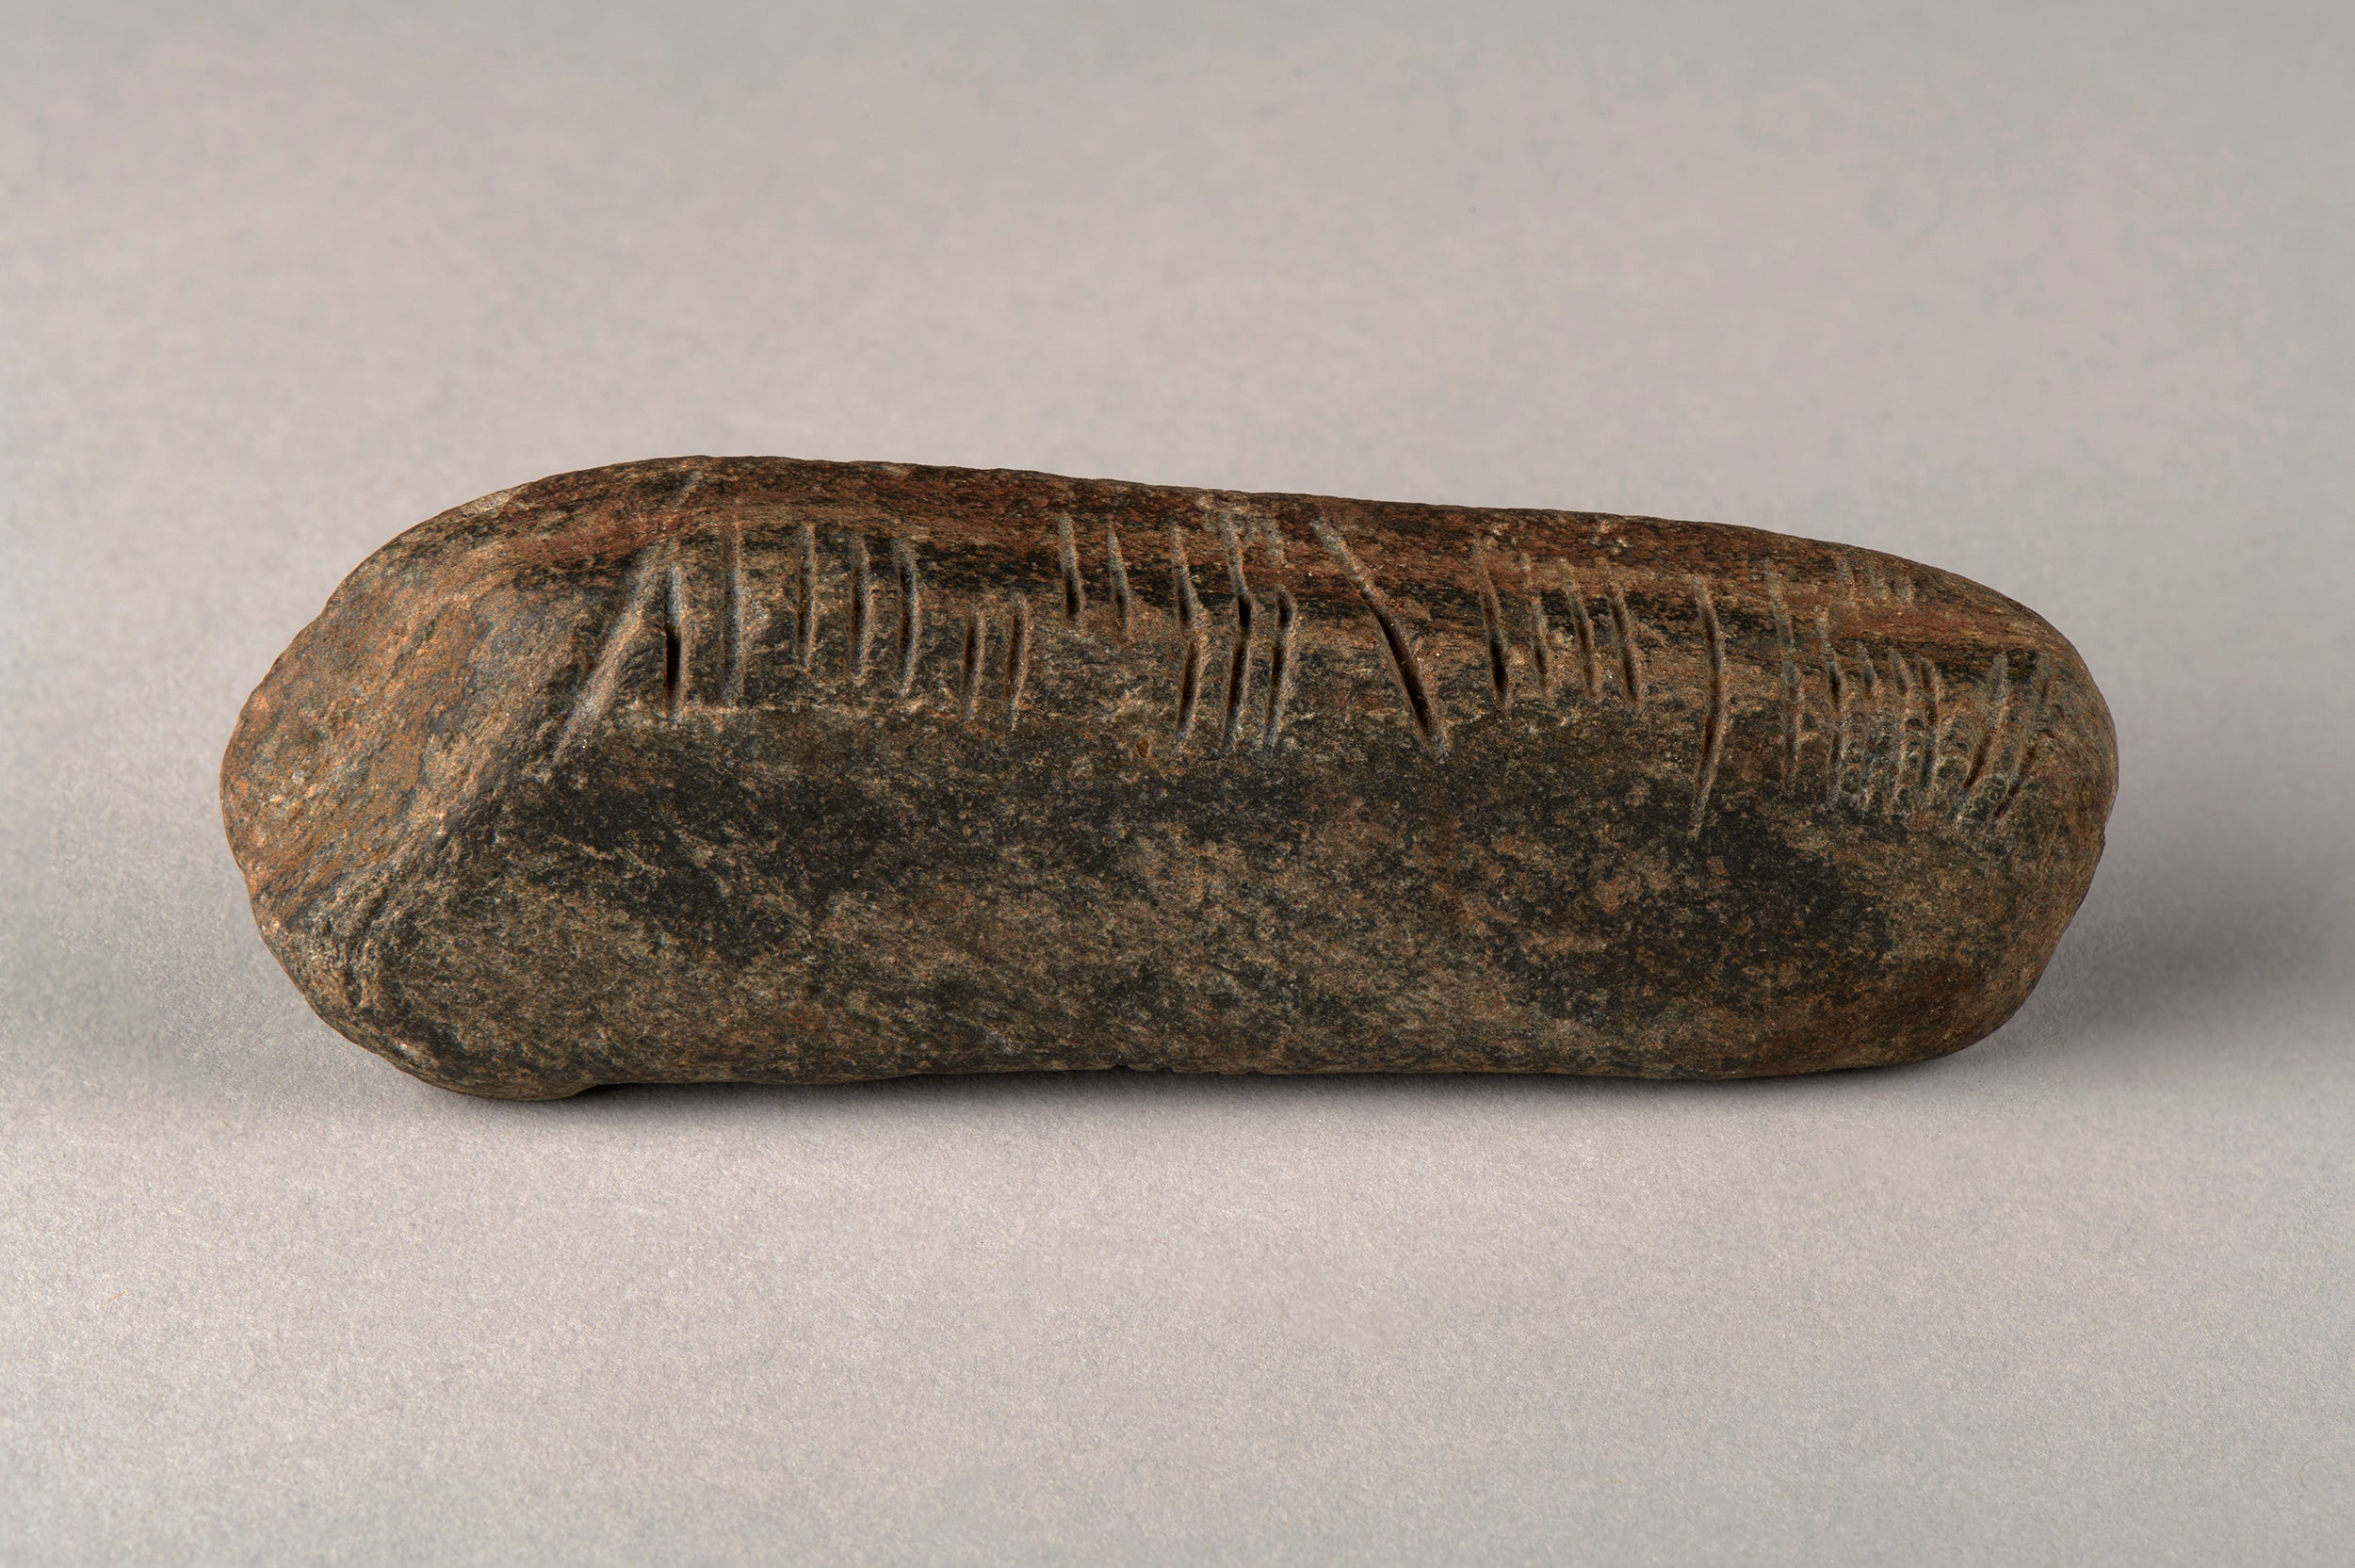 The object is made of sandstone, weighs about 139g and is about 11cm in length